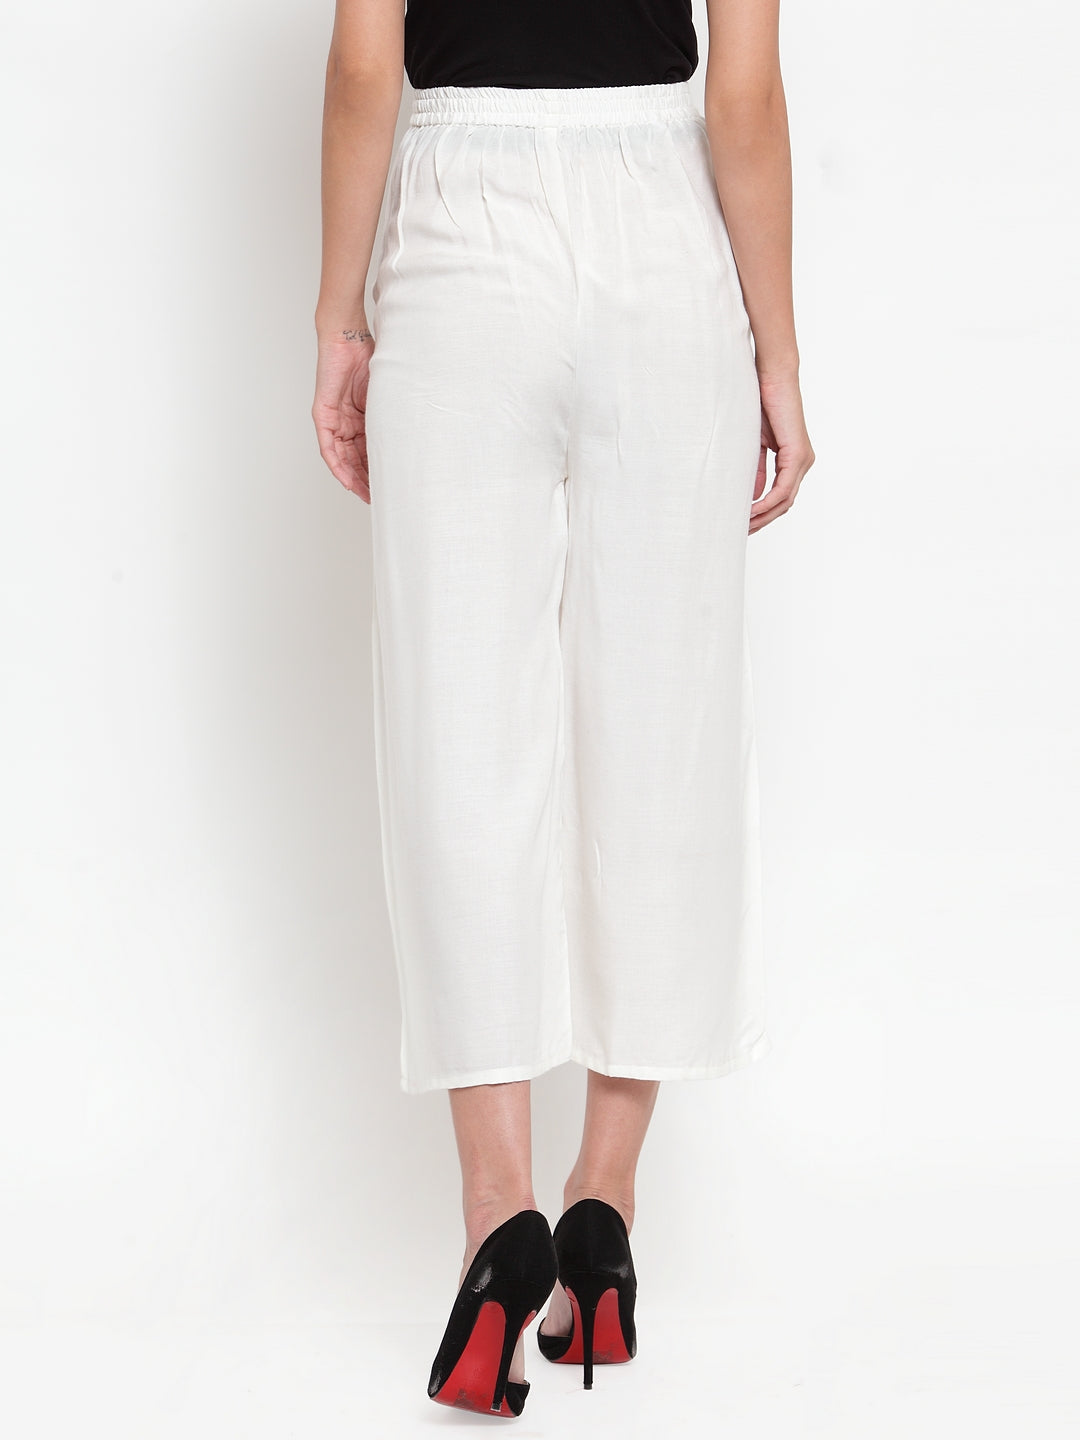 Clora Off-White Solid Rayon Culottes